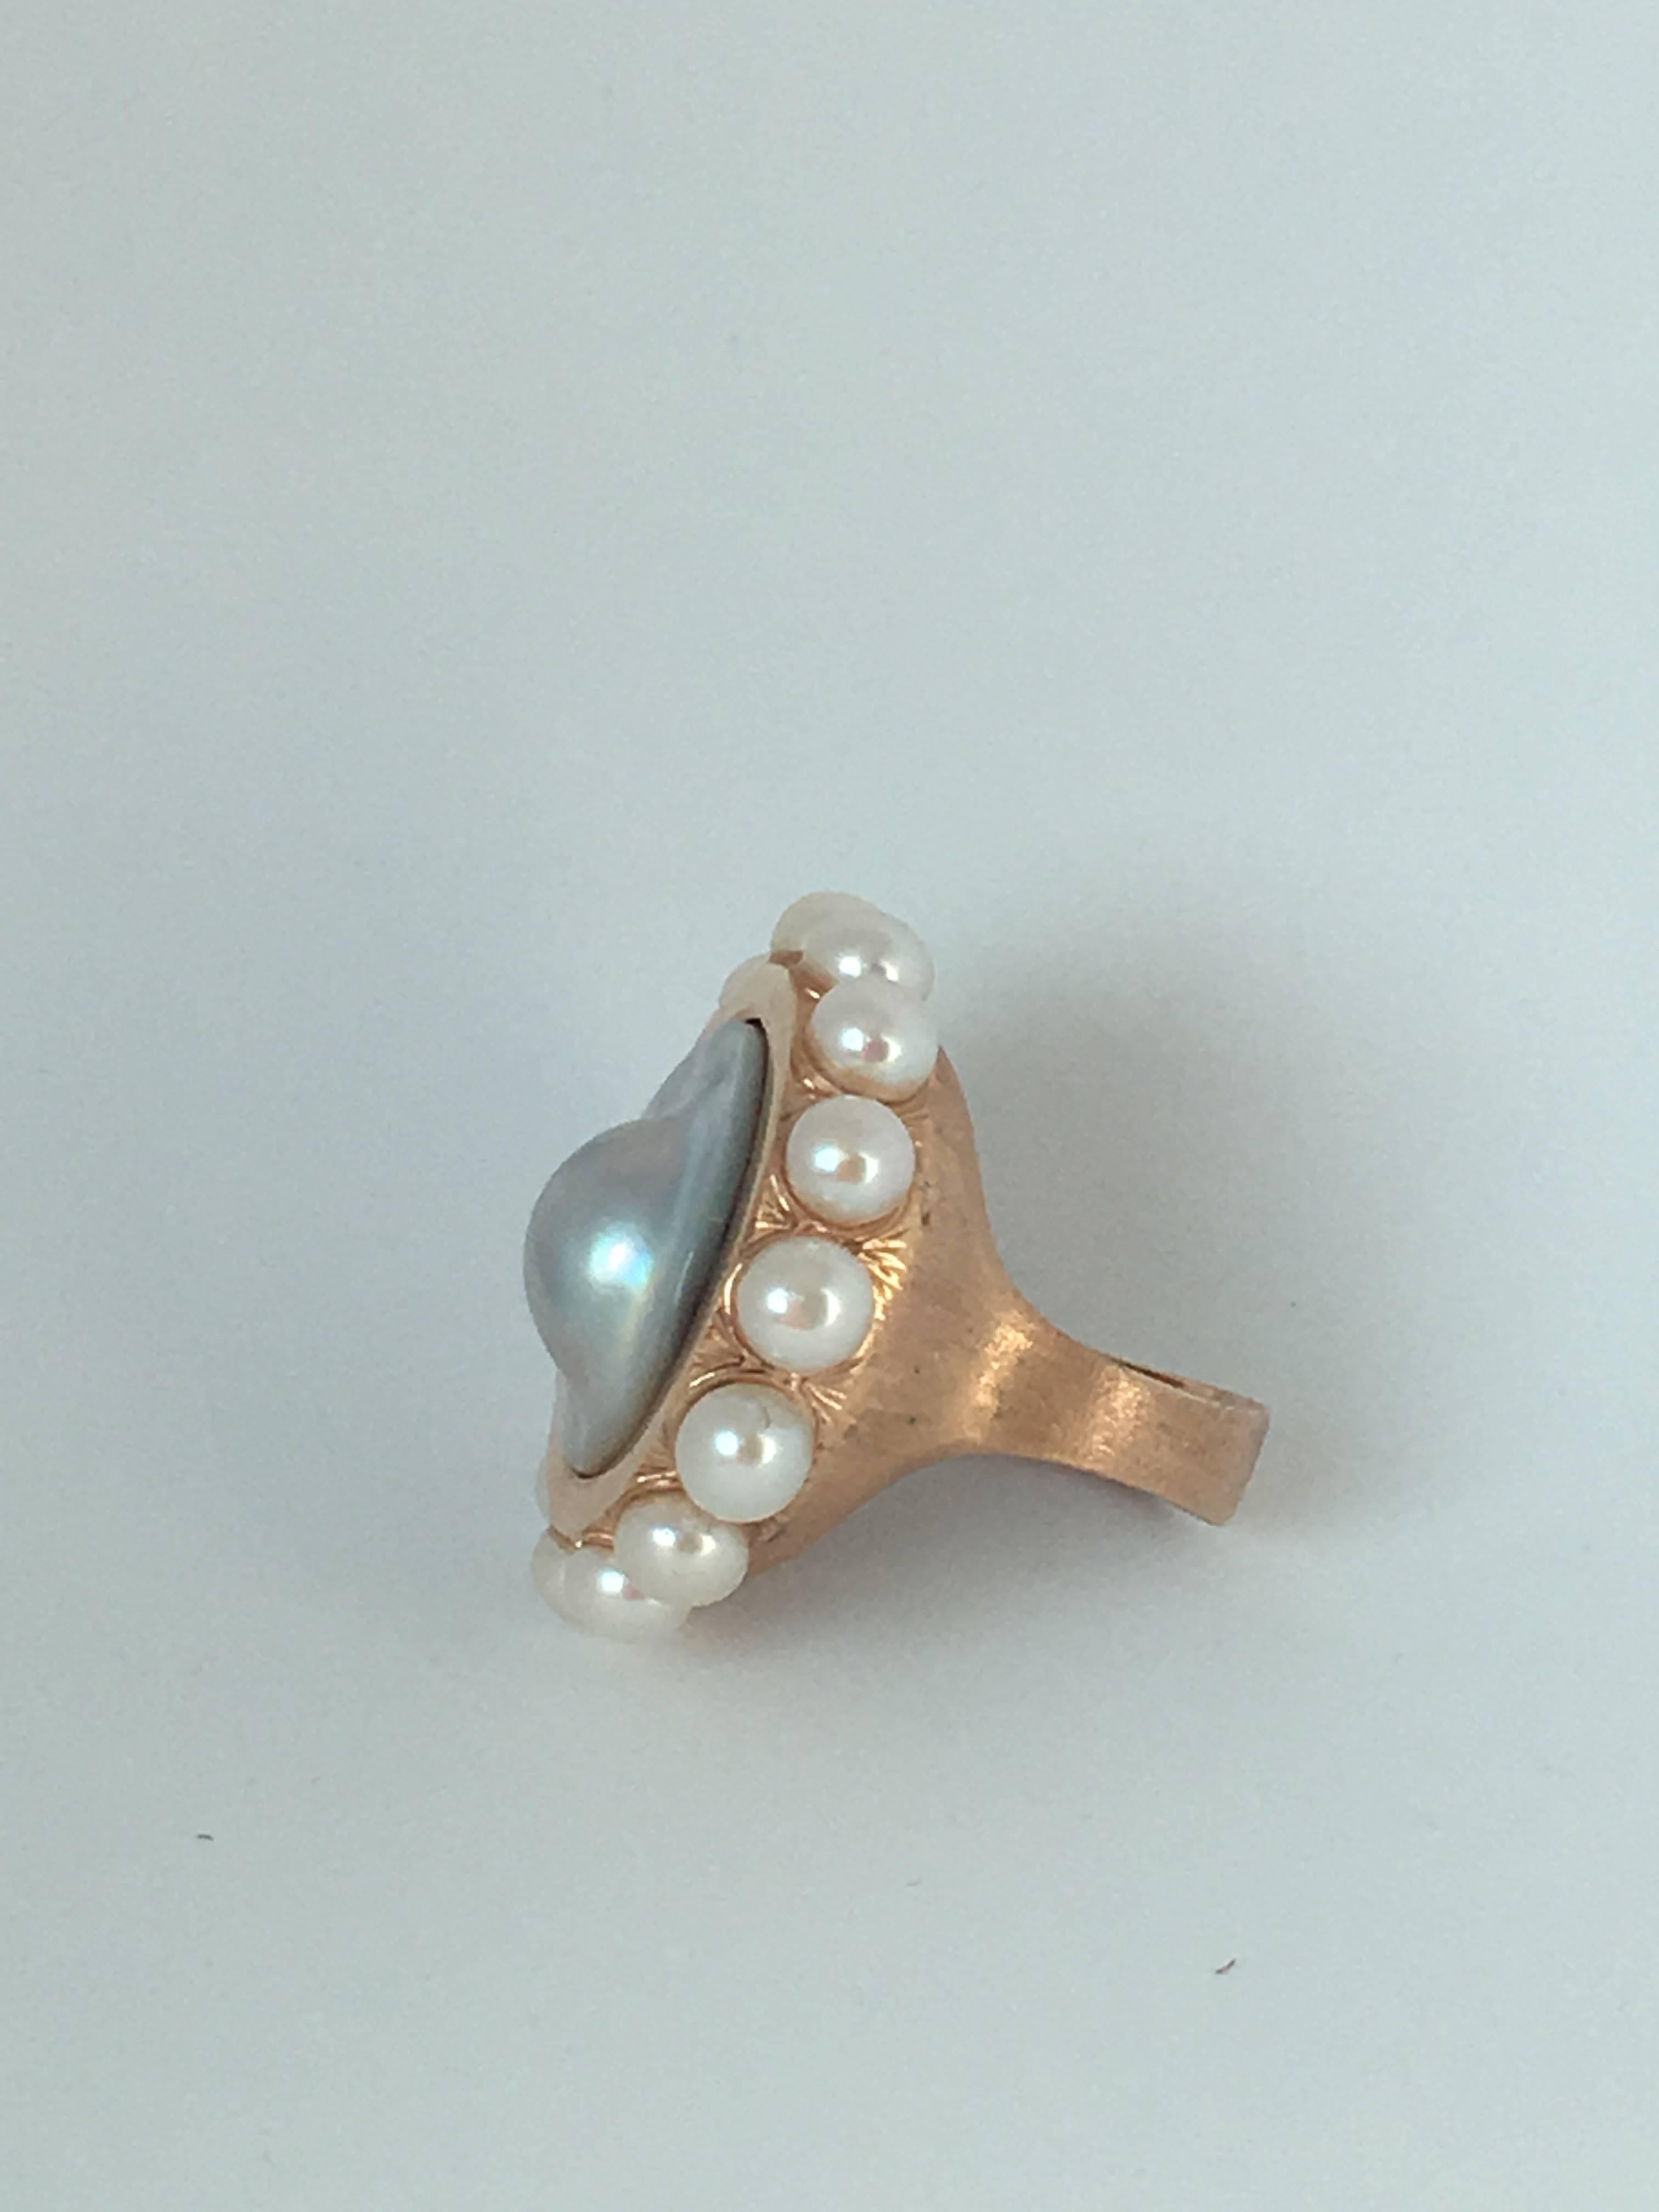 Natural white pearls, big grey iridescent mabè pearl rose gold gr. 18,10.
Size 14.Total weight 23 gr.
Very nice and fine decoration on the side.
All Giulia Colussi jewelry is new and has never been previously owned or worn. Each item will arrive at